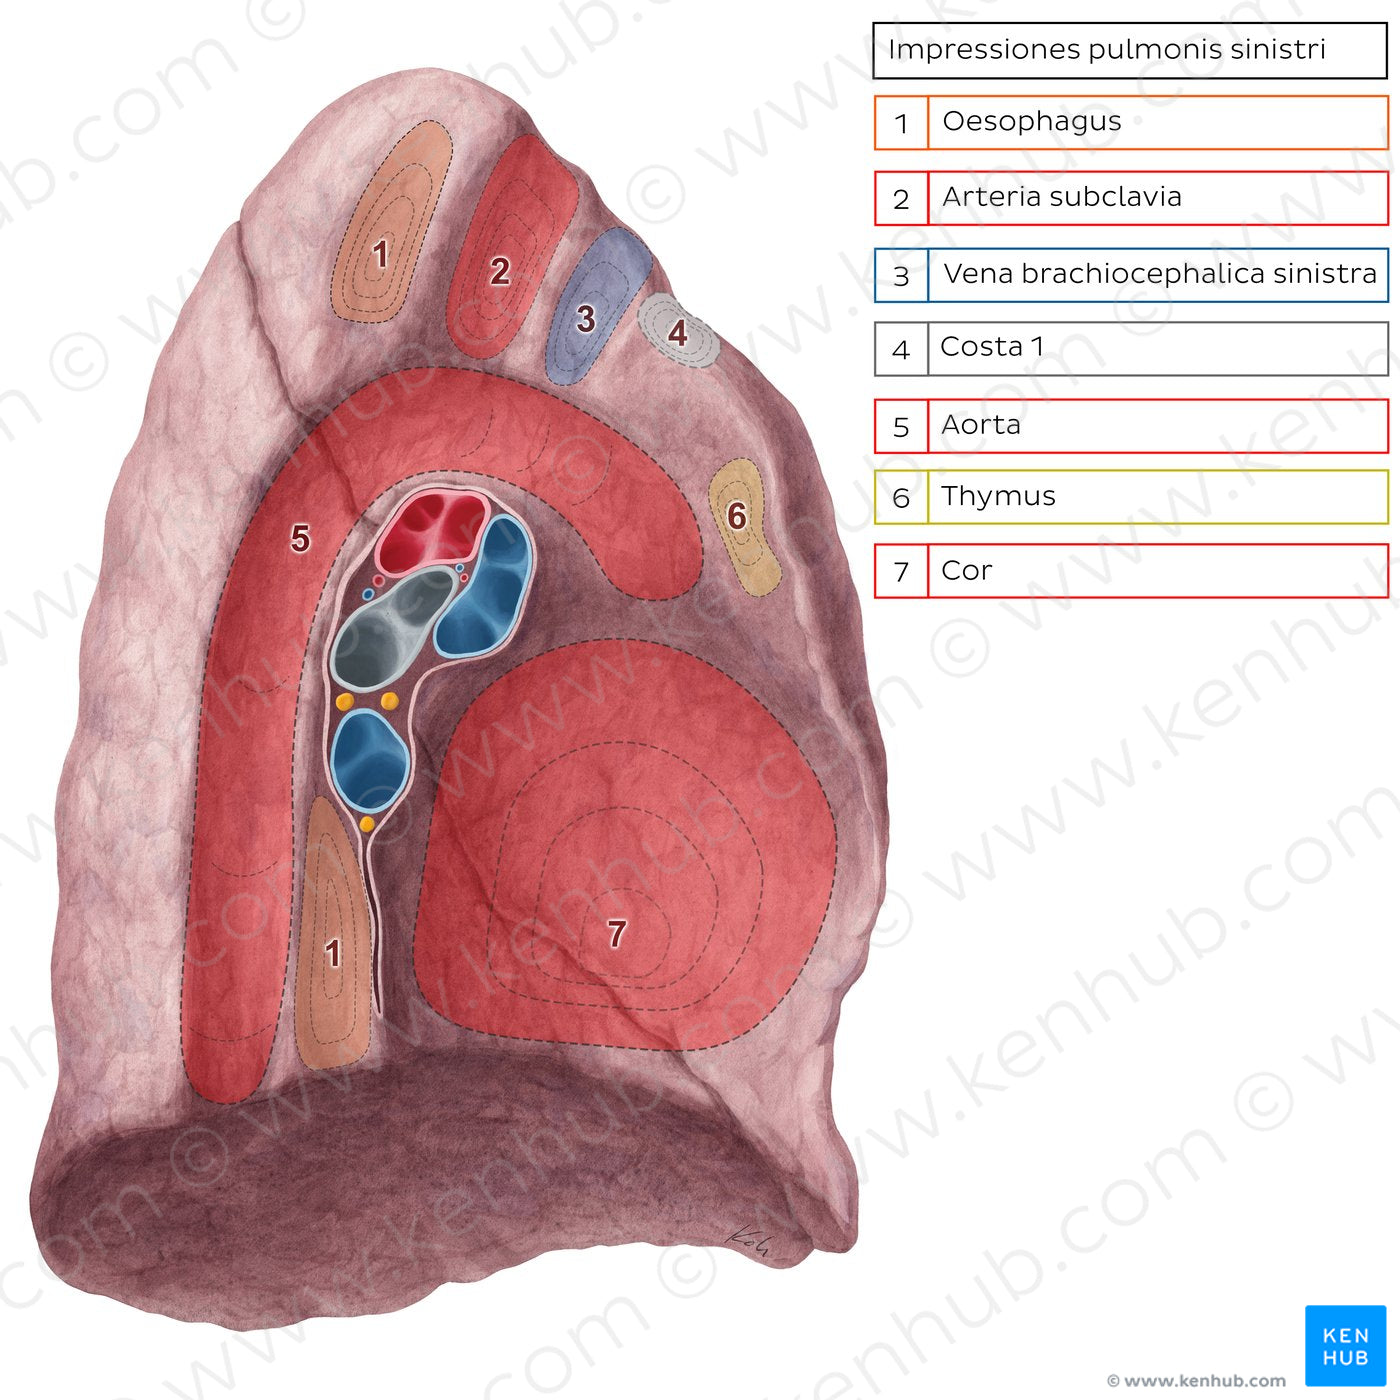 Impressions of left lung (Latin)